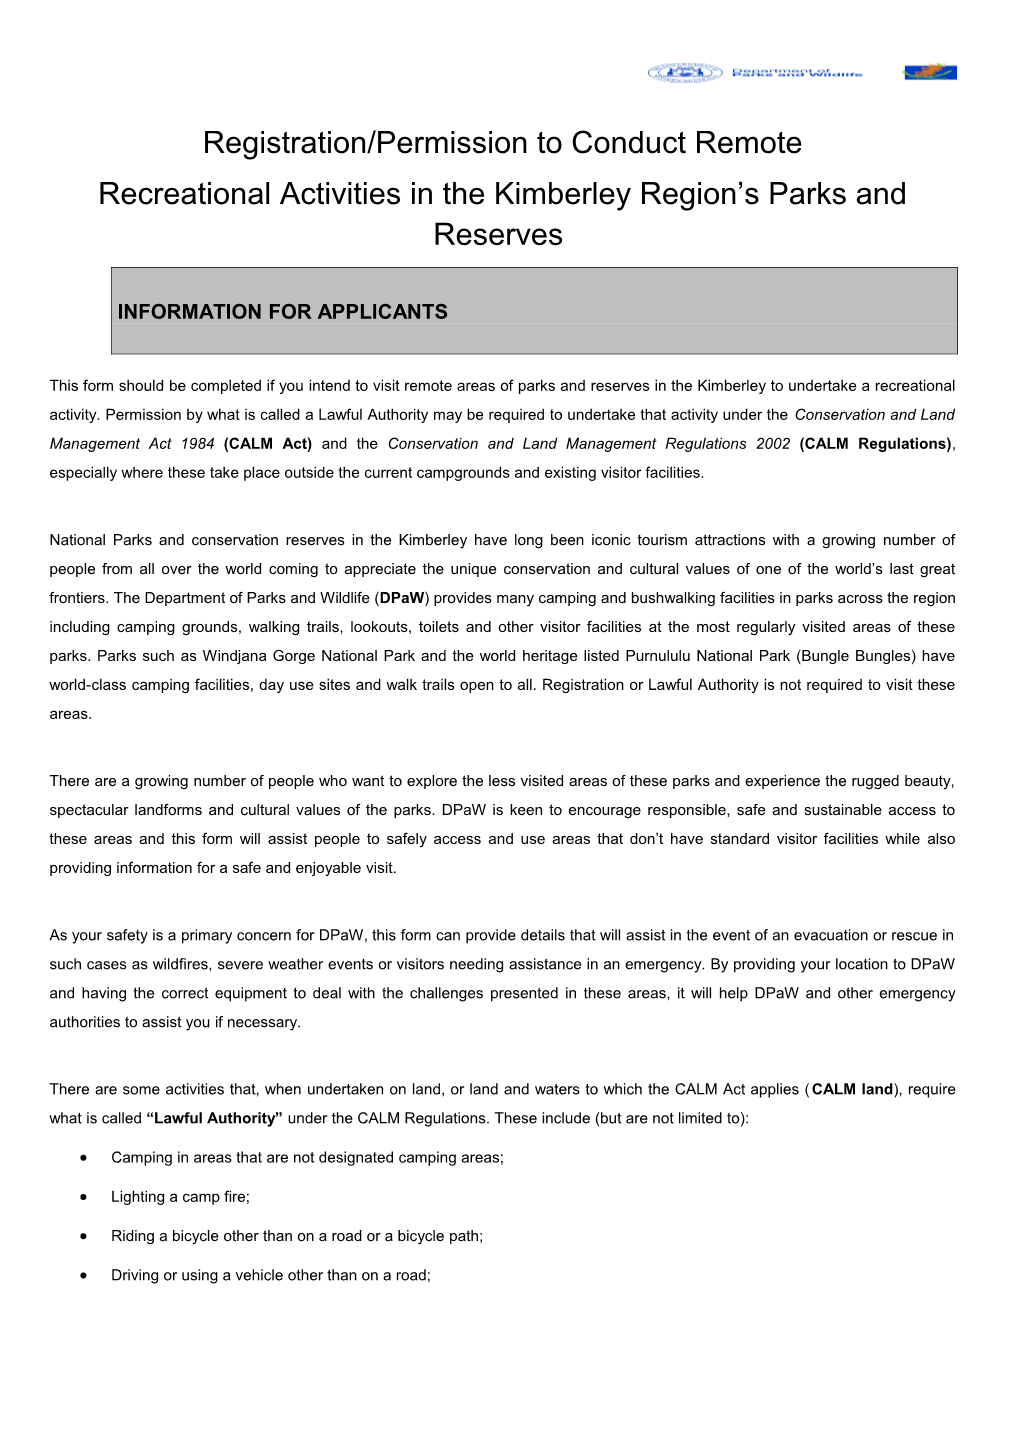 Application to Conduct Remote Recreational Activities in Kimberley Region Parks and Reserves